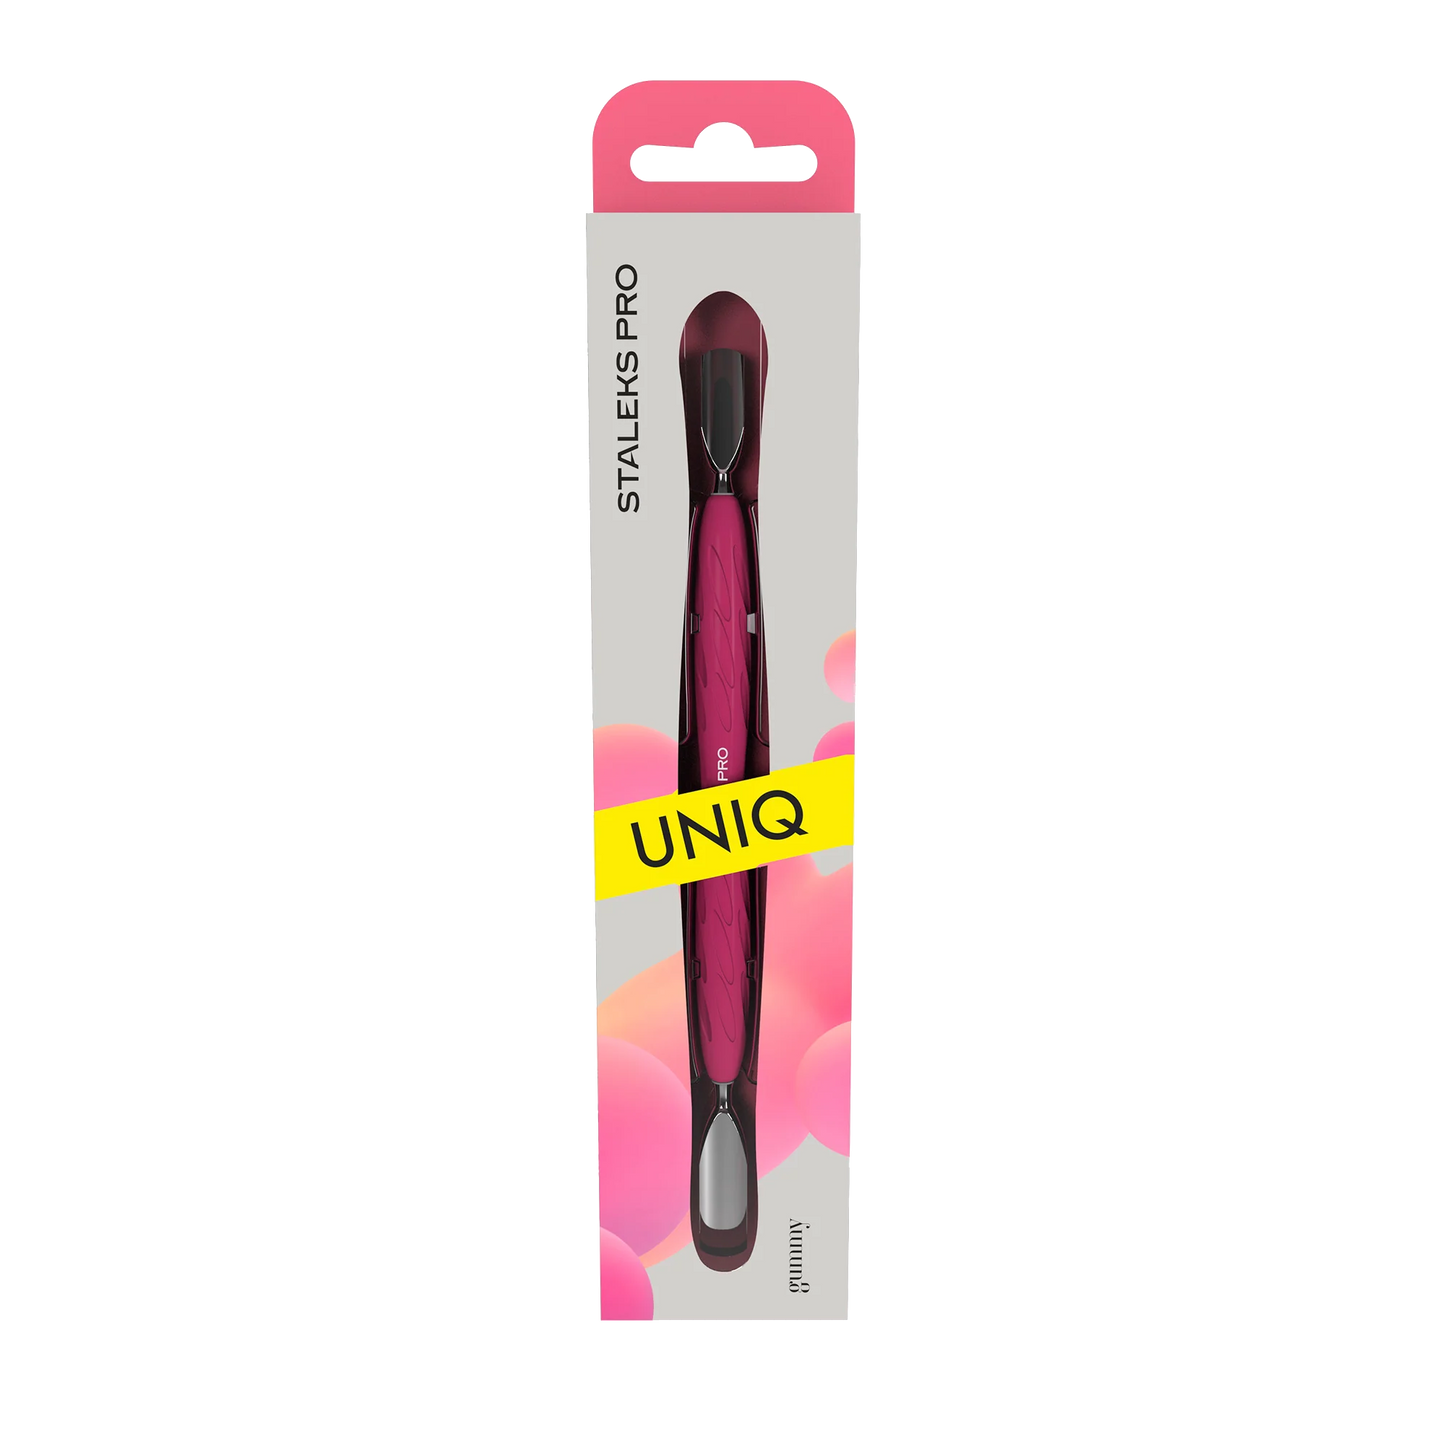 Manicure Pusher With Silicone Handle "Gummy" UNIQ 10 TYPE 1 (Wide Rounded Pusher + Narrow Rounded Pusher) -PQ-10/1